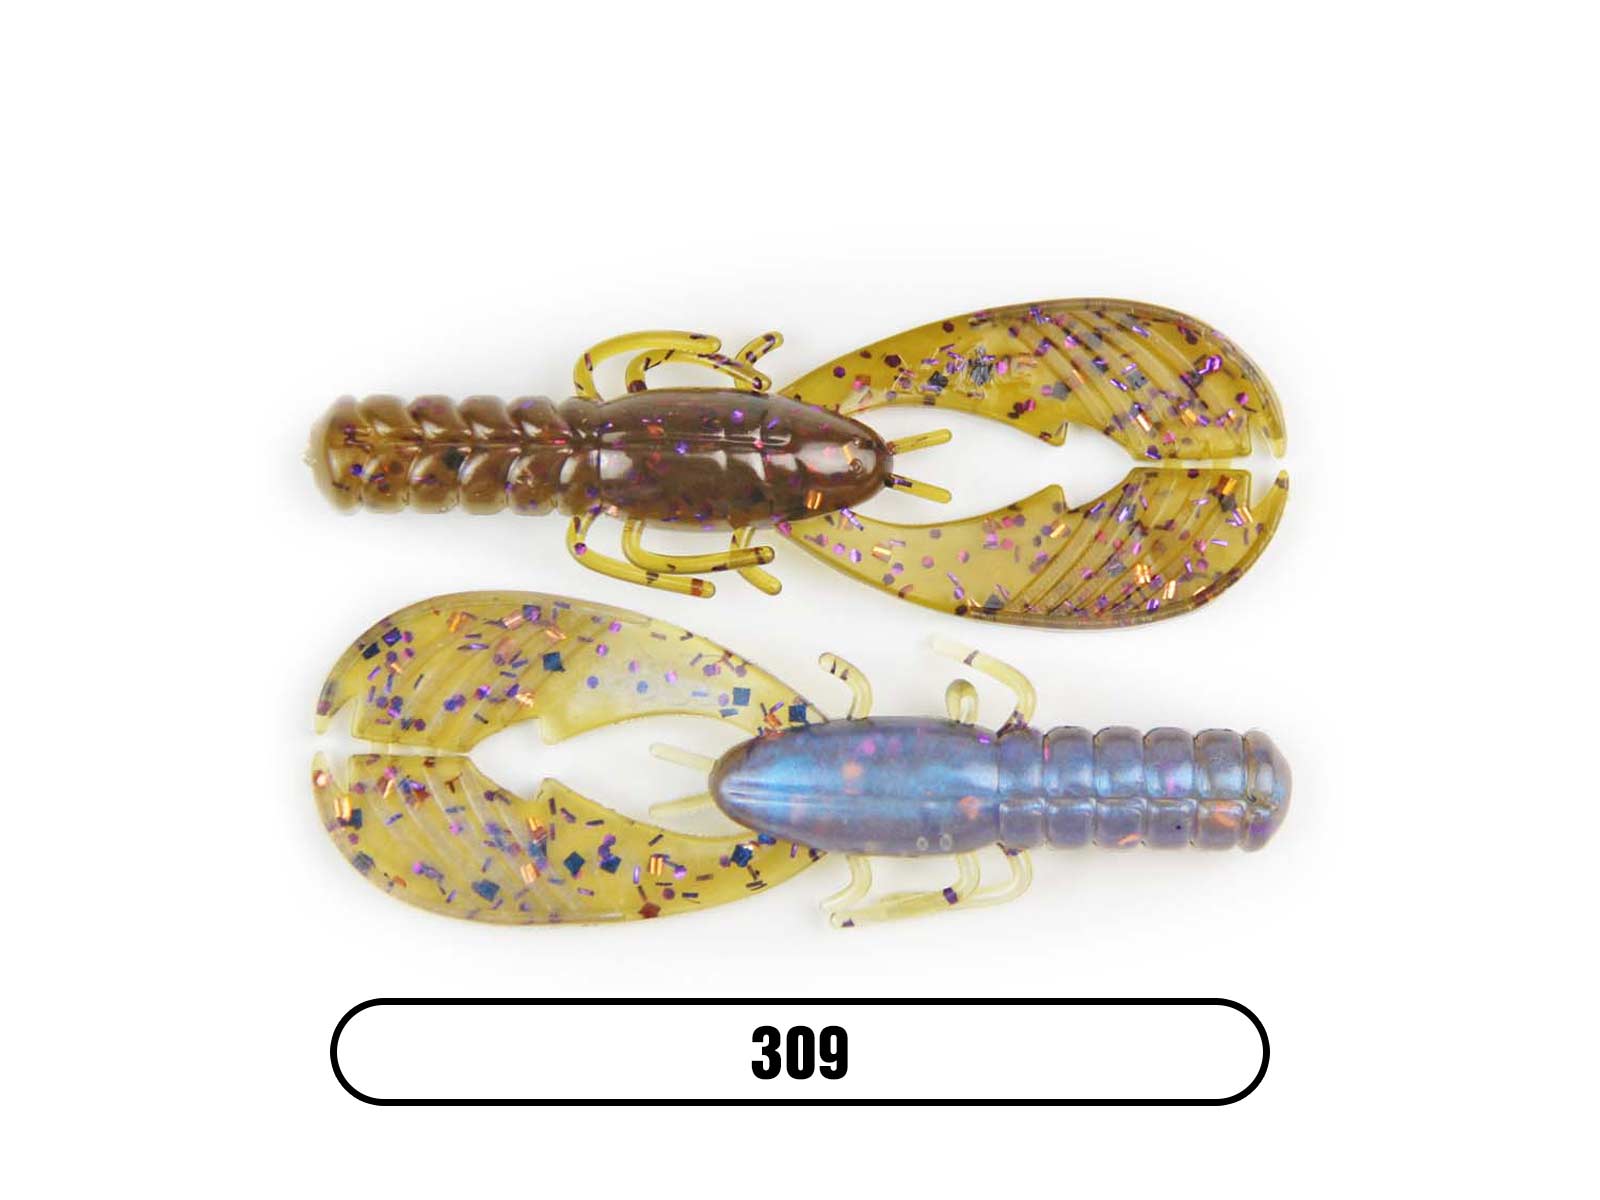 YUM Craw Chunk 3.25'' Jig Trailer Choose Your Color